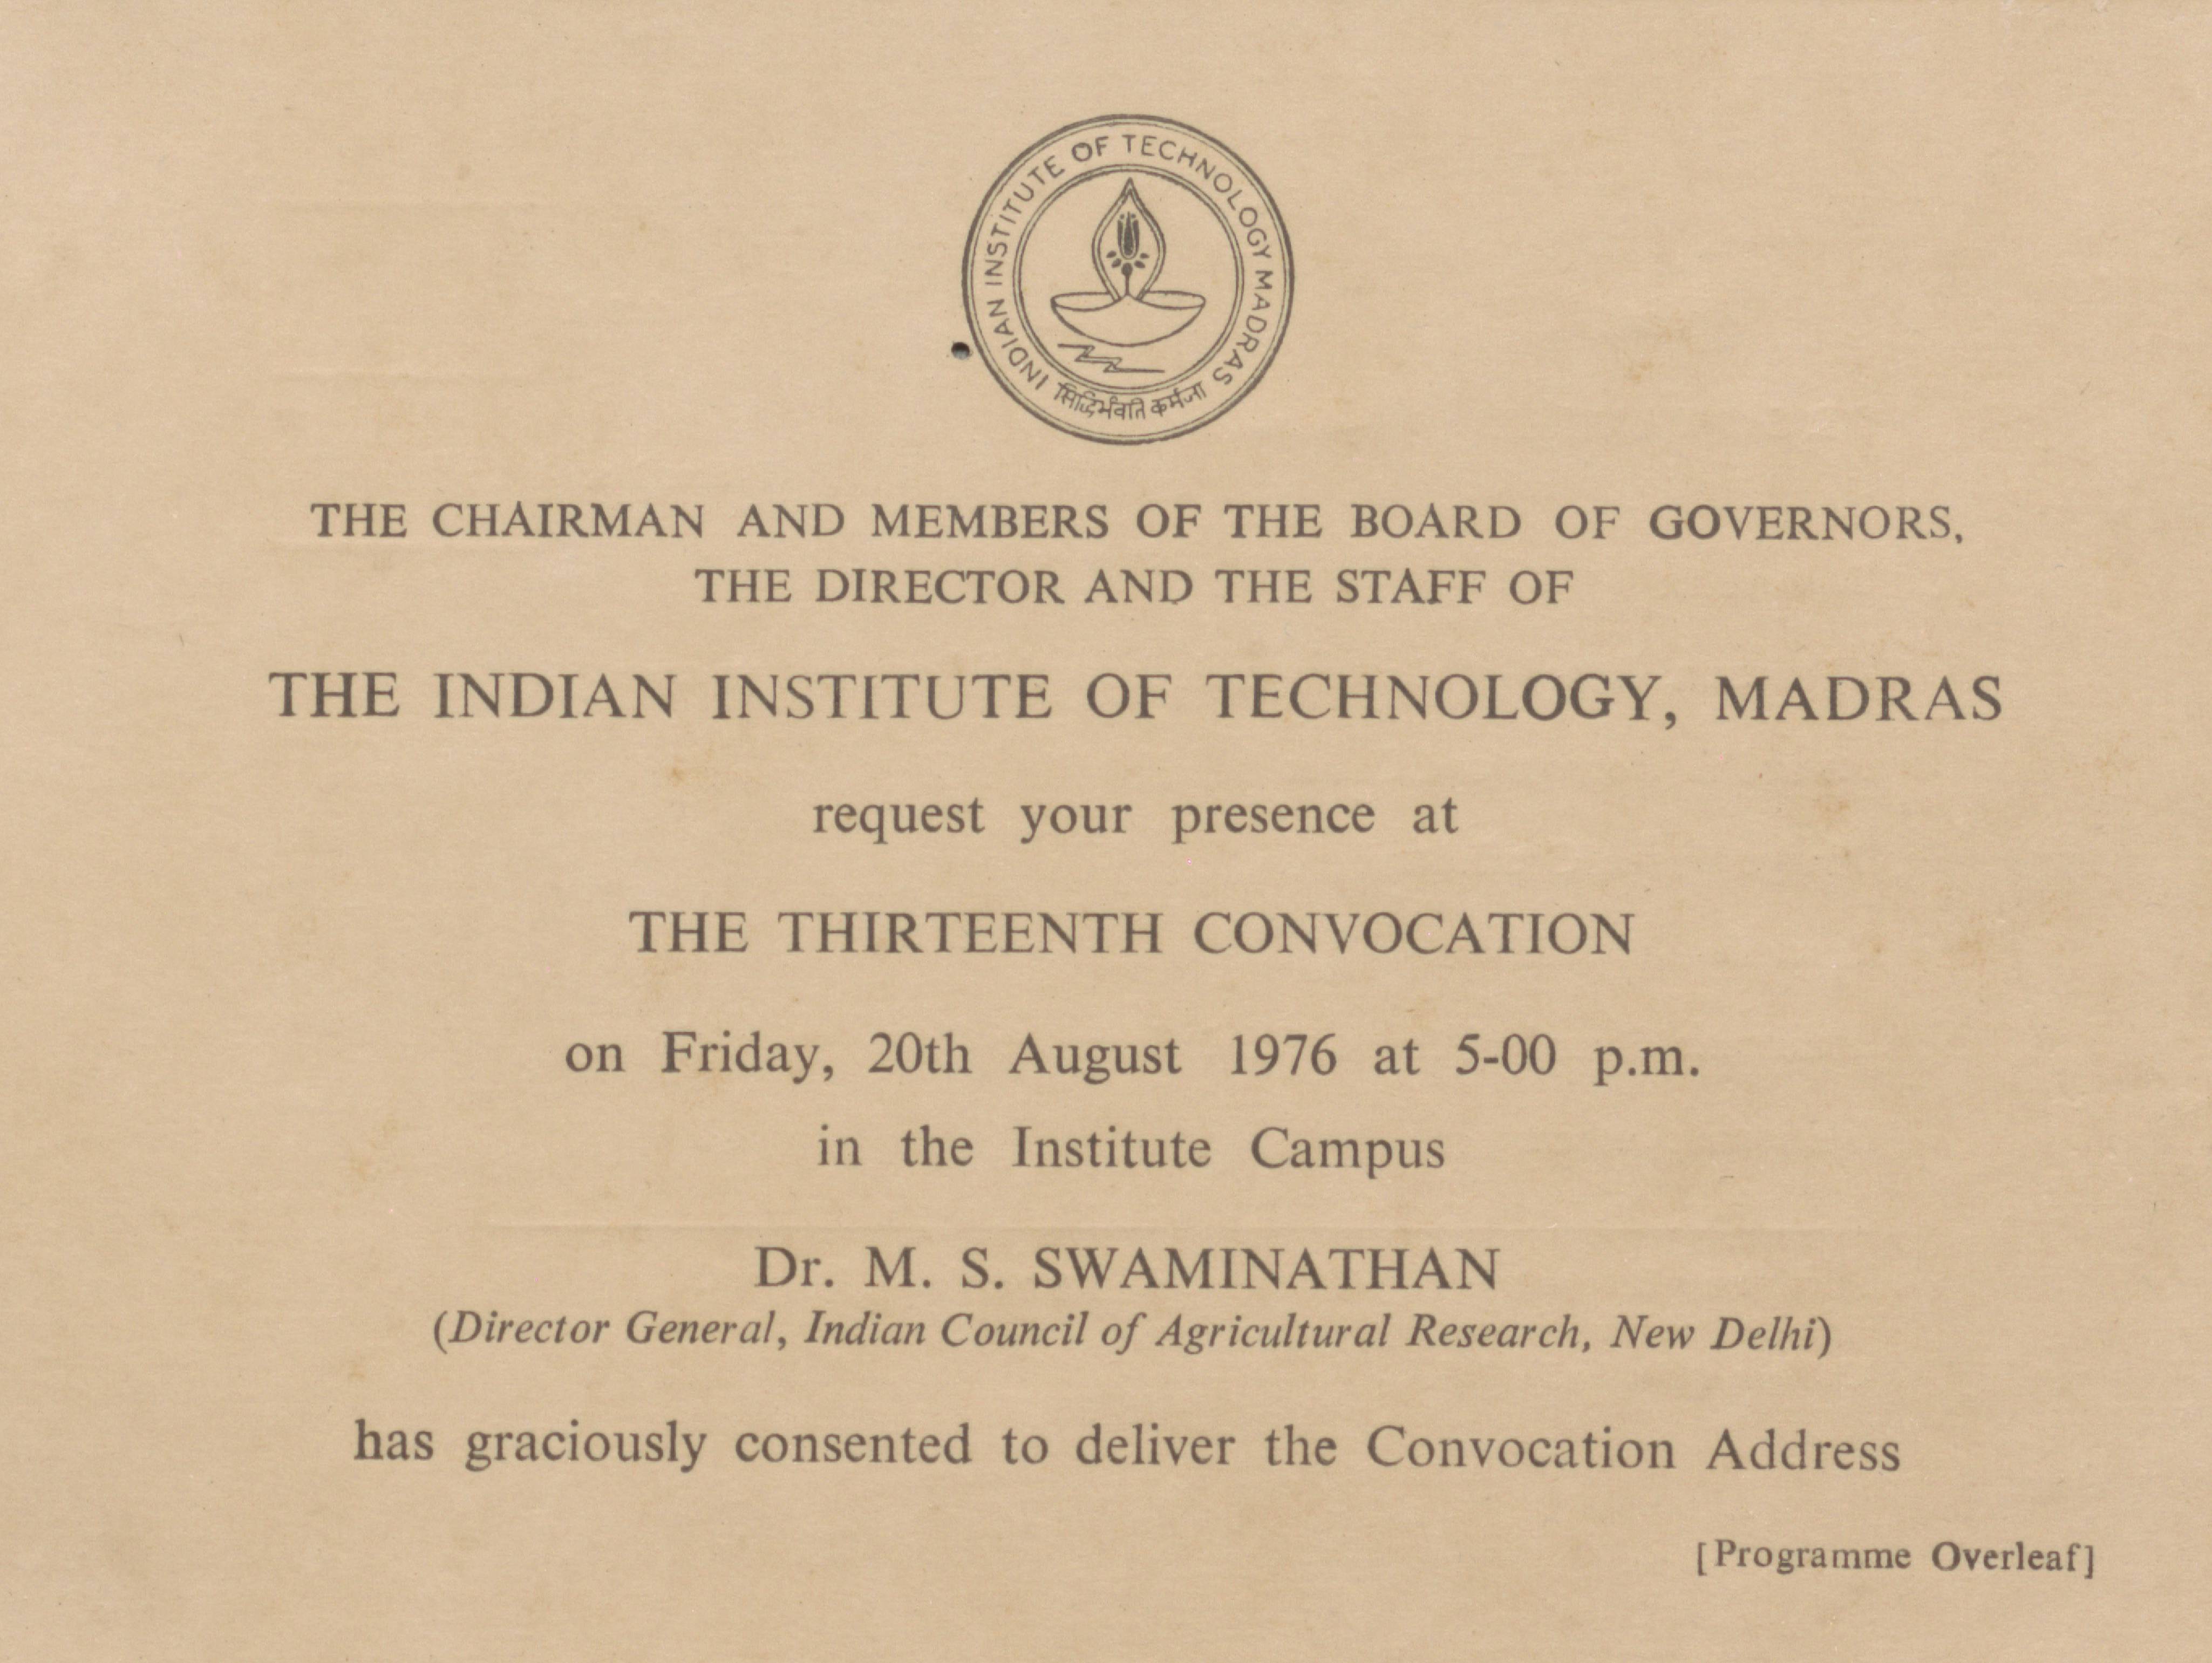 Thirteenth Convocation at the Indian Institute of Technology, Madras